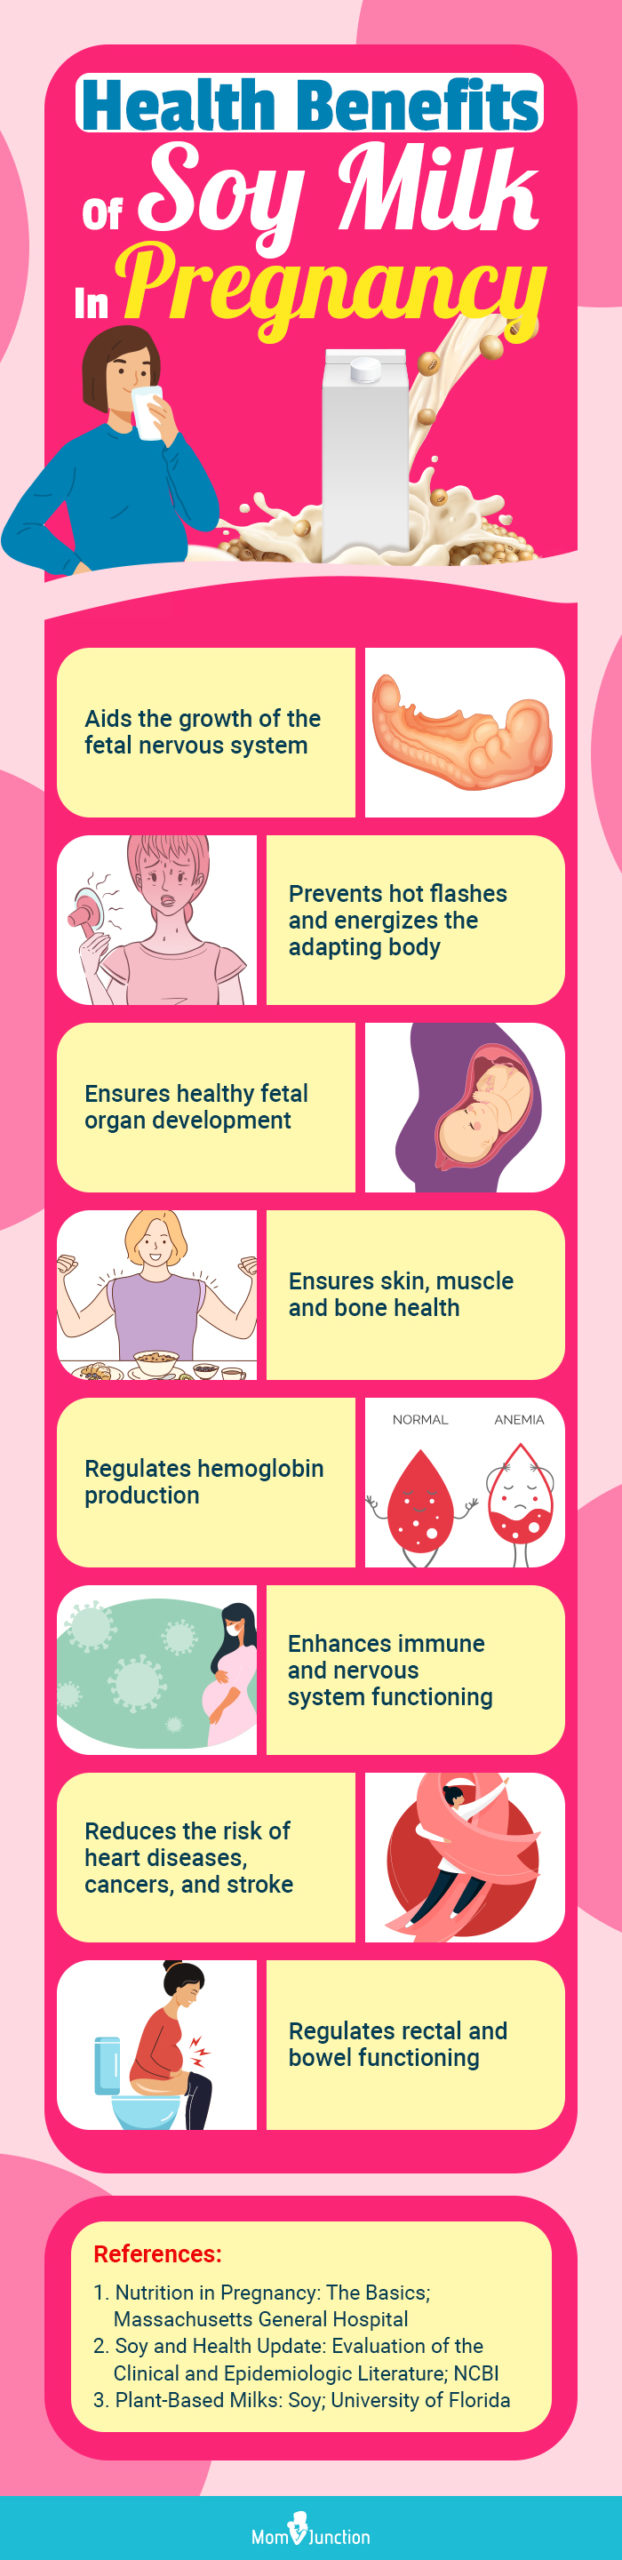 health benefits of soy milk in pregnancy (infographic)